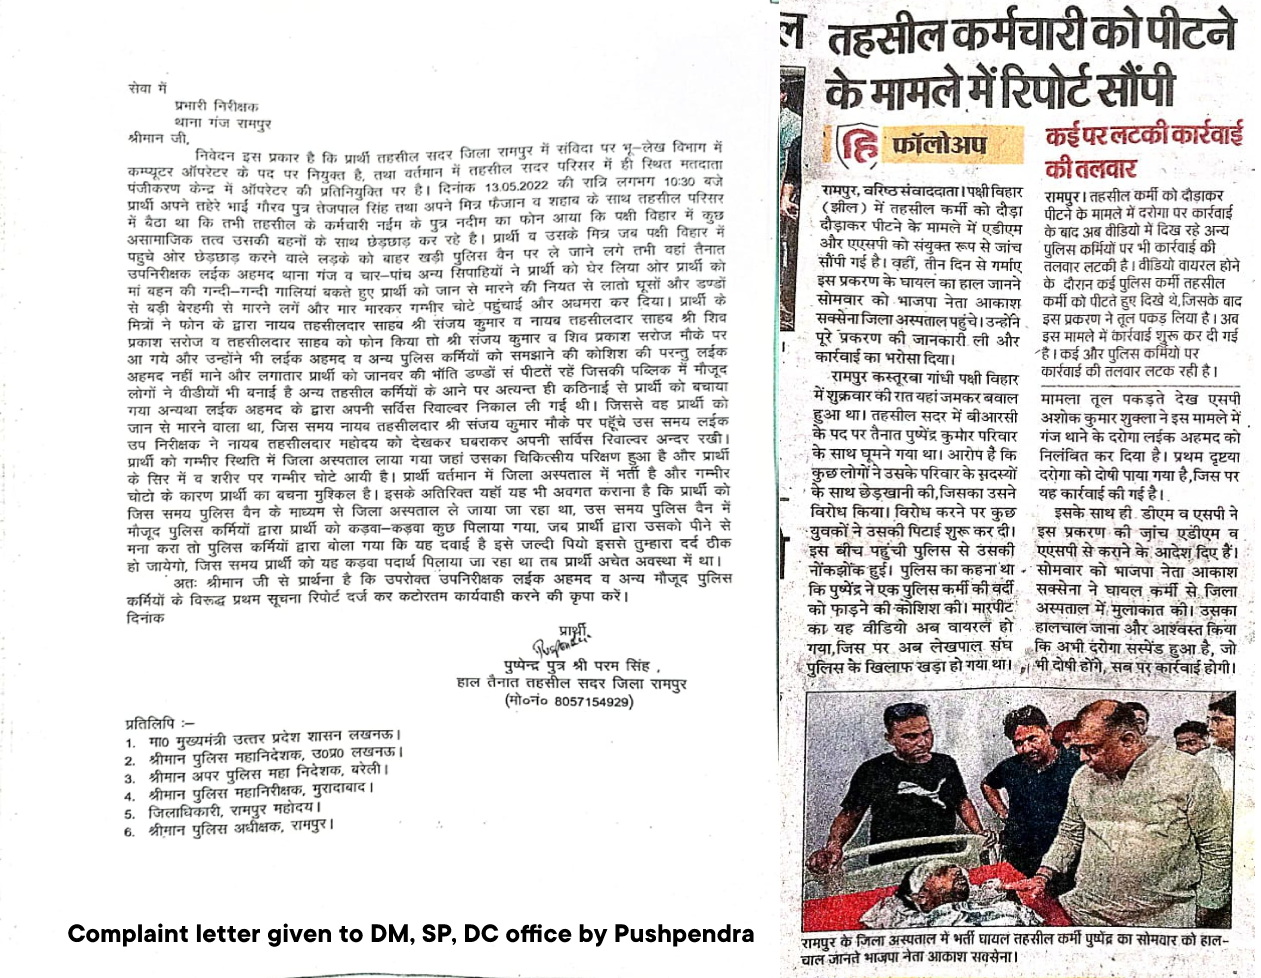 Pushpendra shared a complaint letter and local News report with us(Source: Accessed by The Logical Indian)